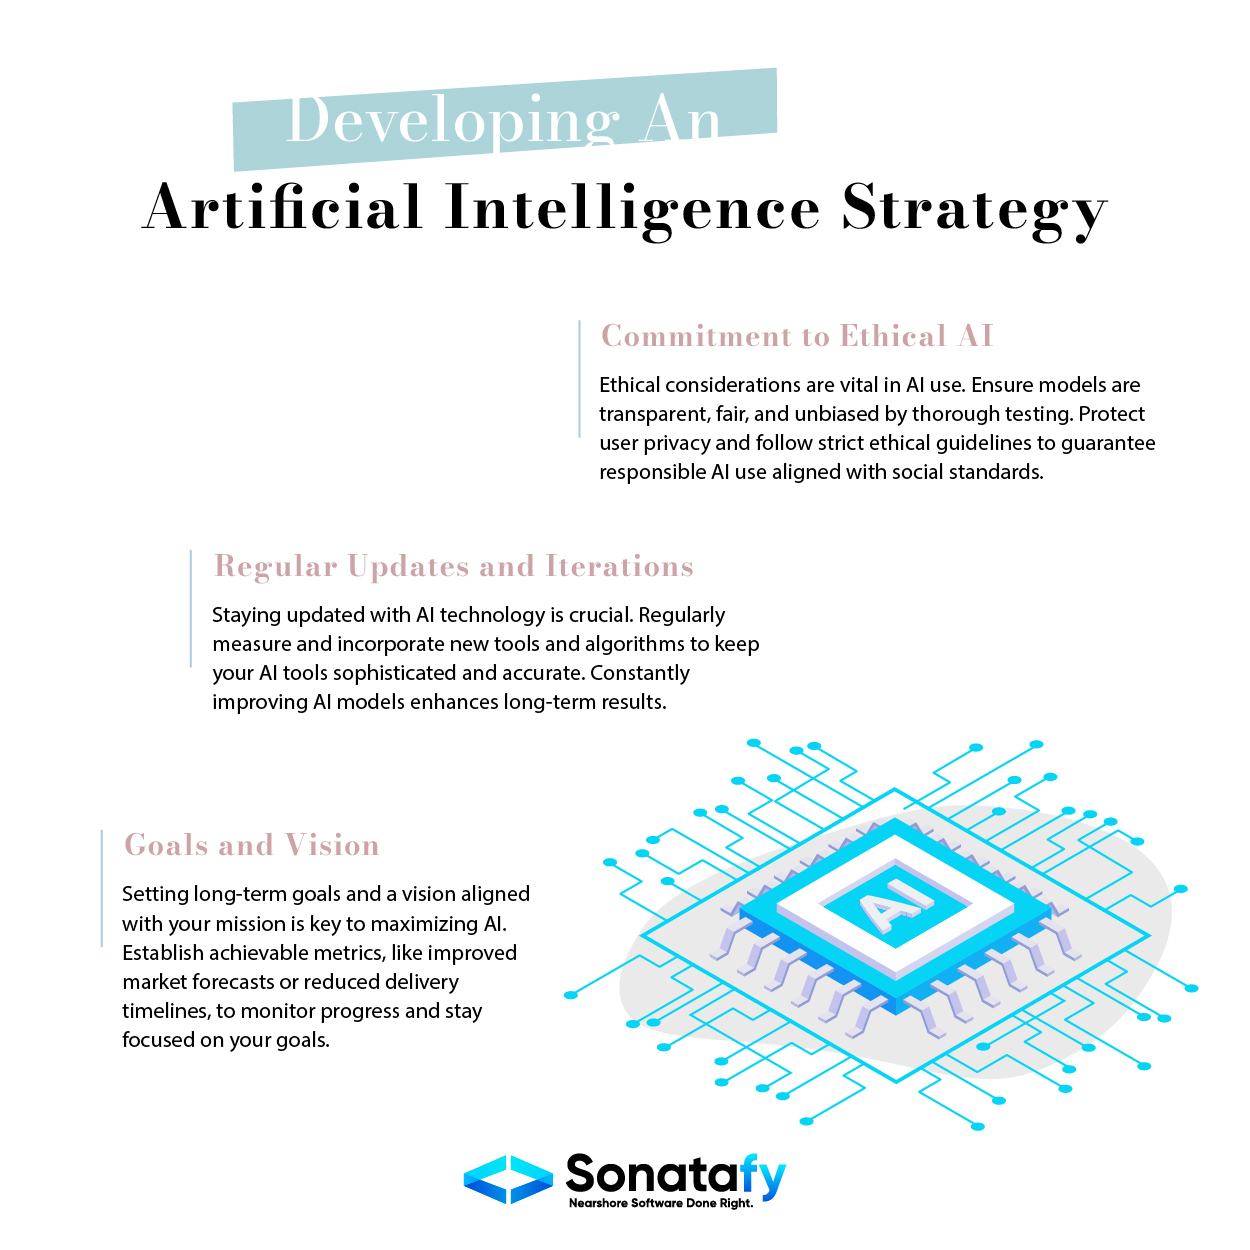 Developing an AI Strategy